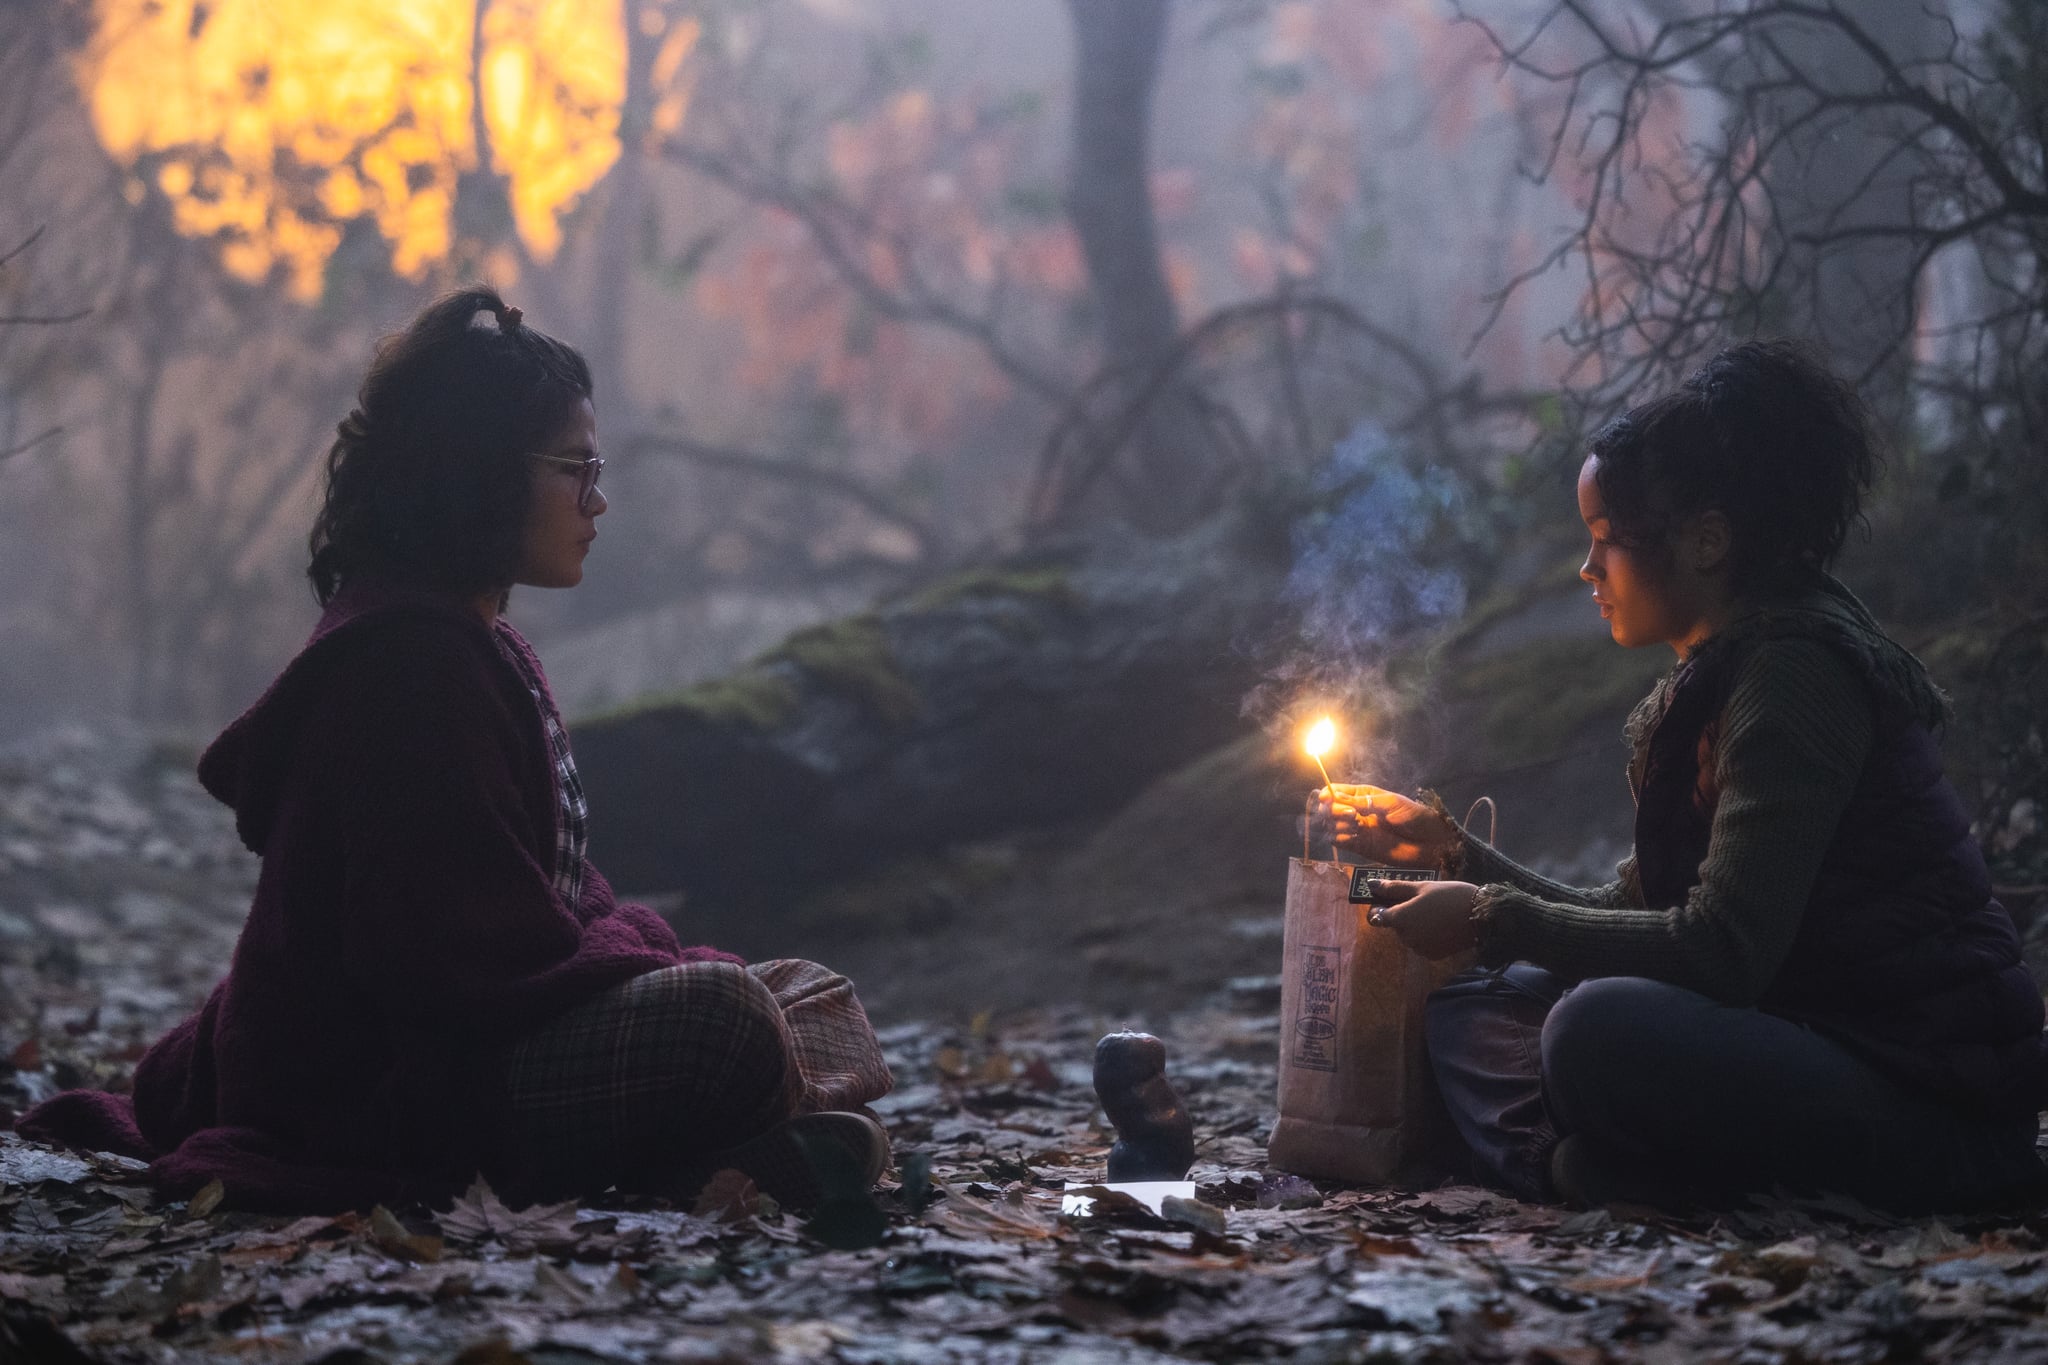 (L-R): Belissa Escobedo as Izzy and Whitney Peak as Becca in Disney's live-action HOCUS POCUS 2, exclusively on Disney+. Photo by Matt Kennedy. © 2022 Disney Enterprises, Inc. All Rights Reserved.